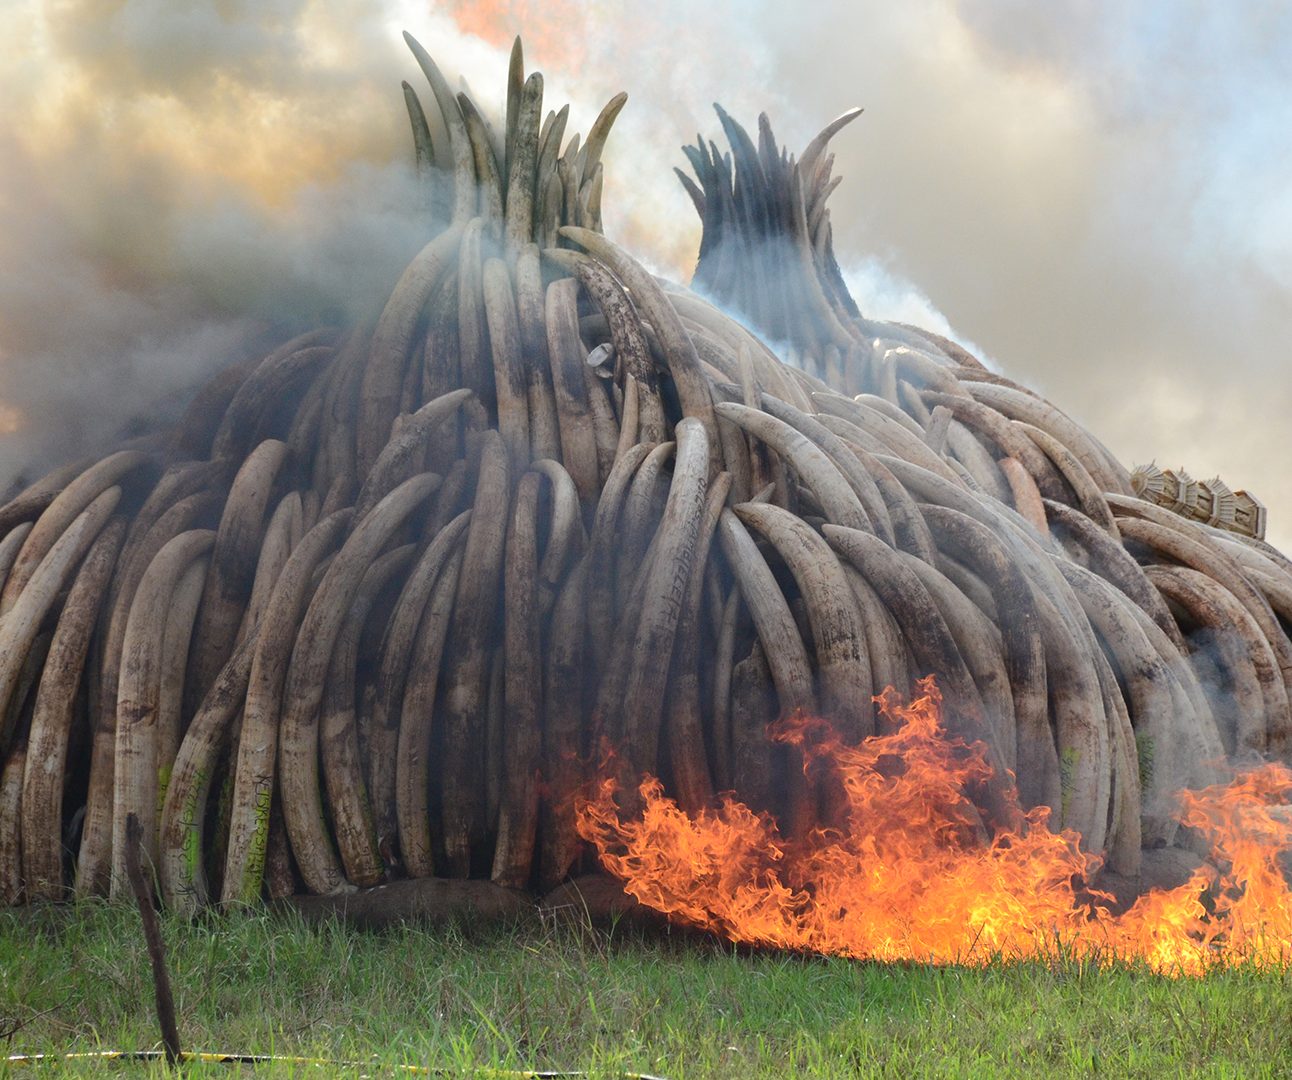 Two piles of elephant ivory tusks being burned